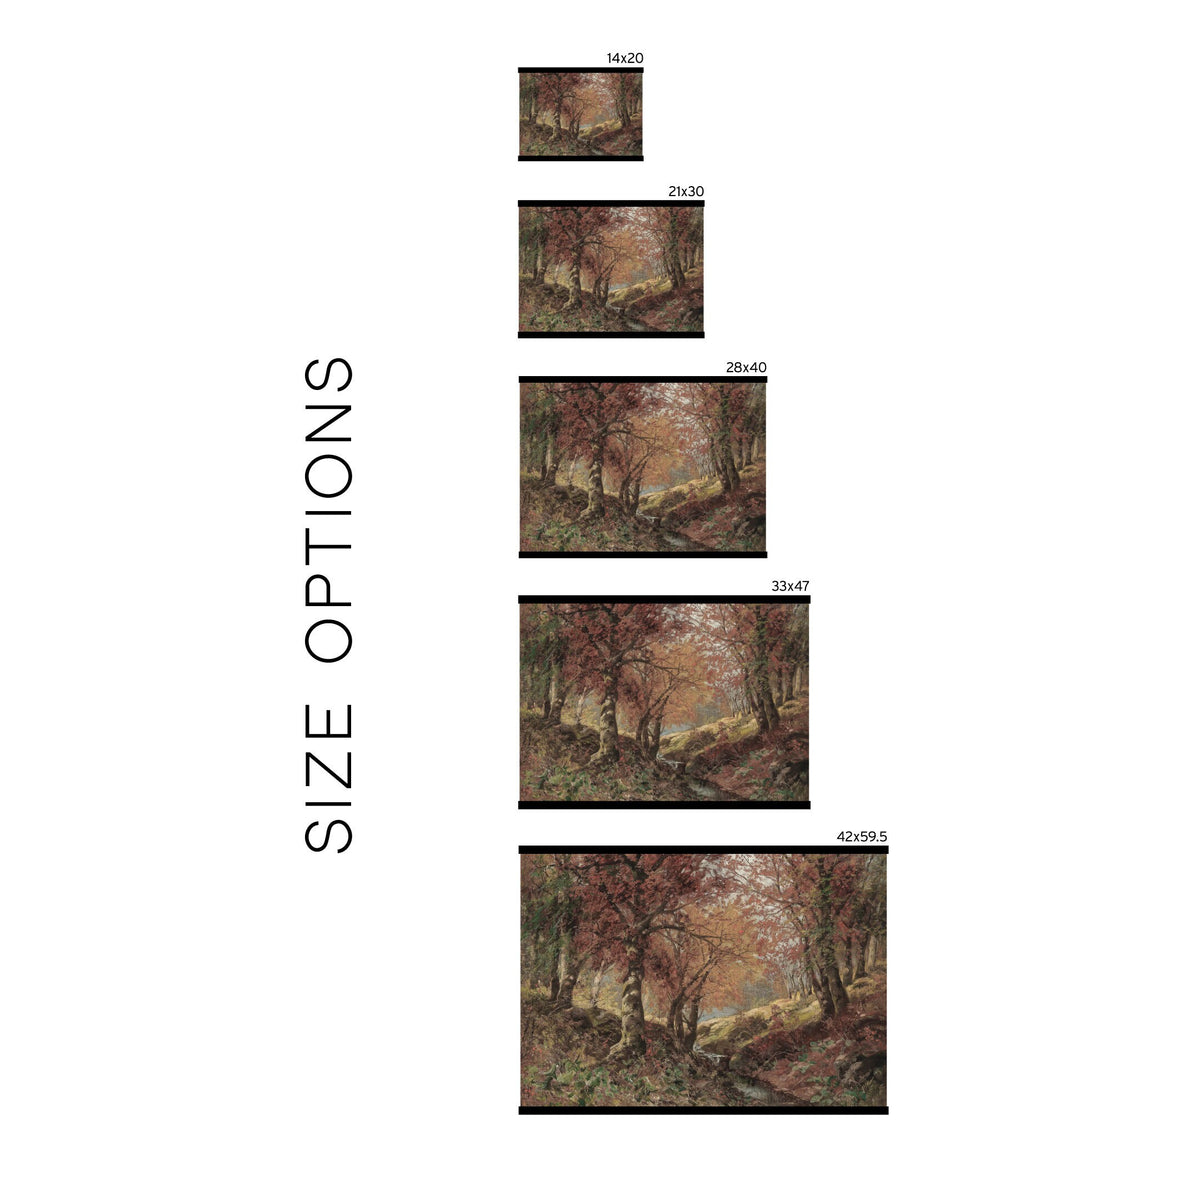 Autumn Forest Painting | T2